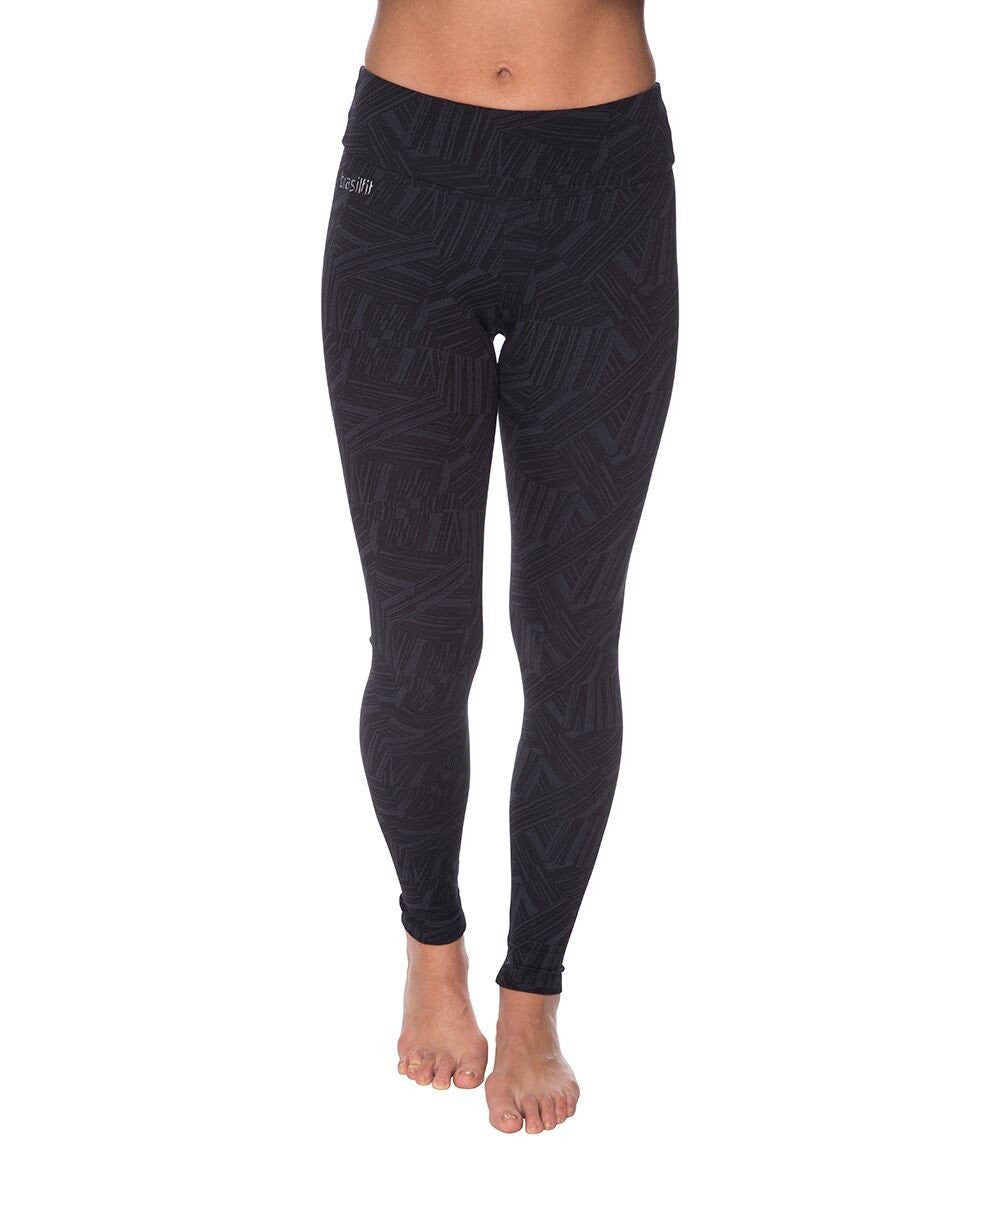 Side view product image for Brasilfit Faith Full Length activewear leggings.  Faith leggings are part of our textured activewear legging collection that is focused on performance, high compression activewear.